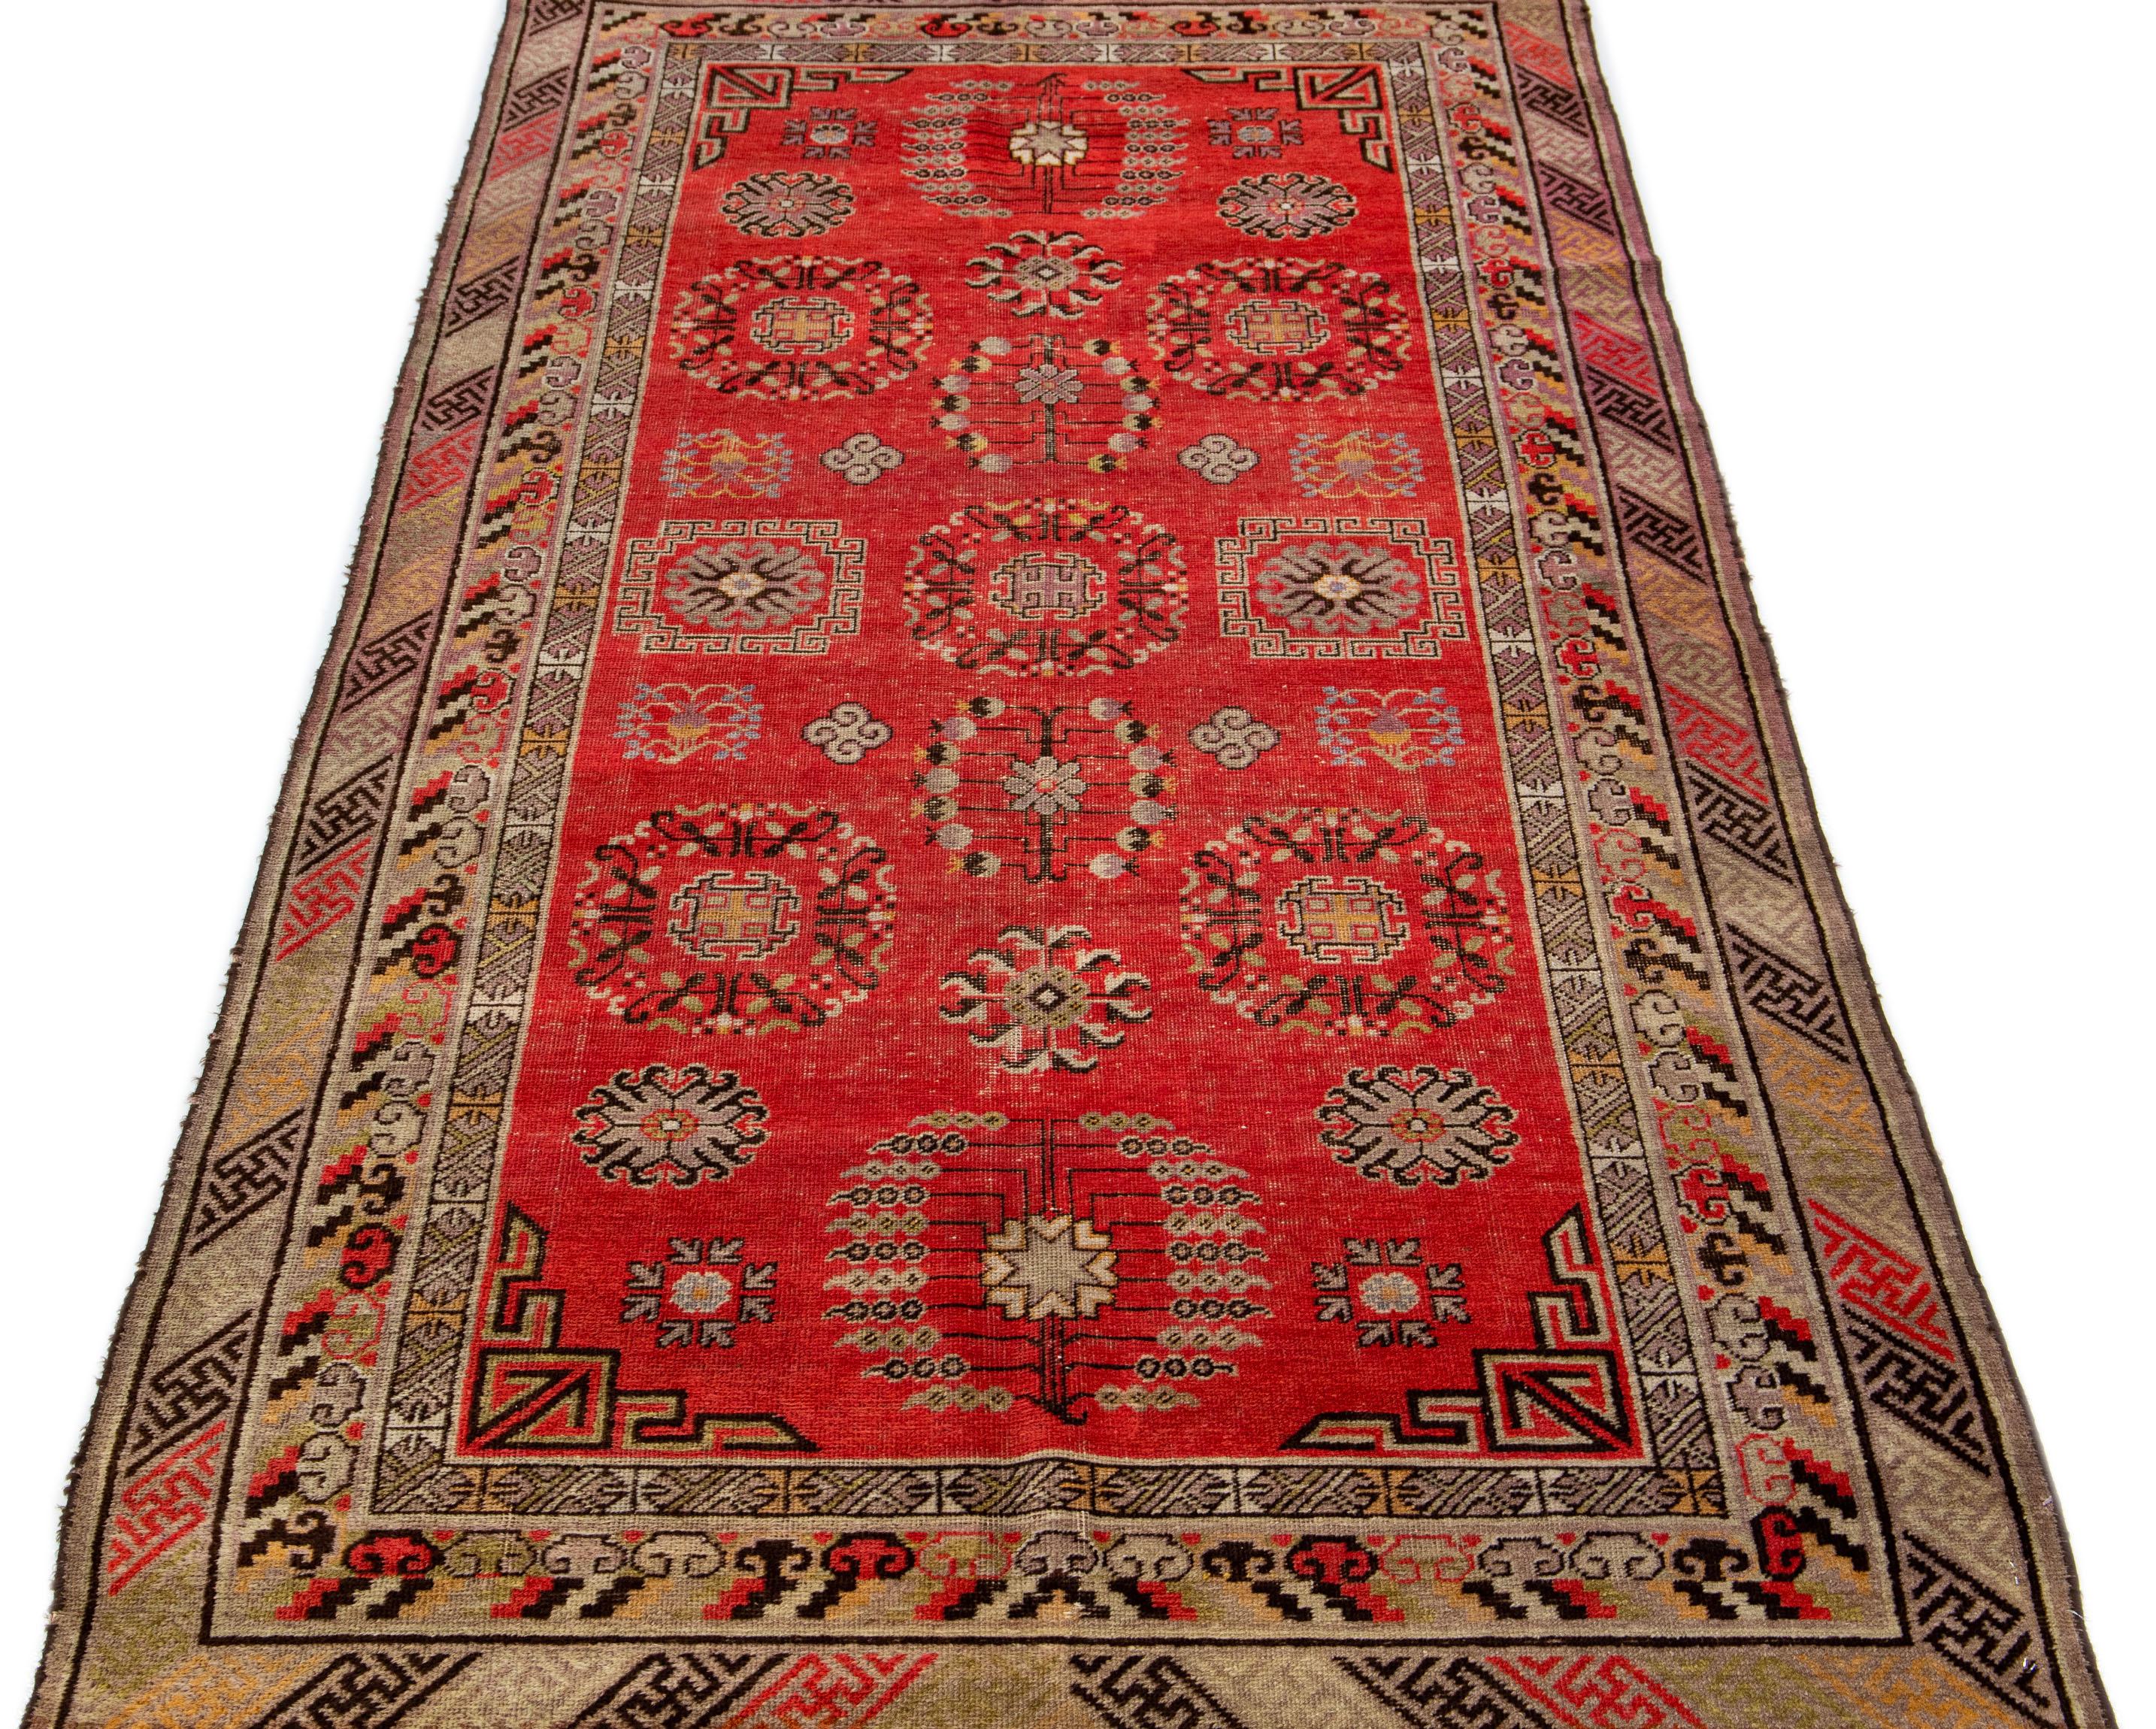 Beautiful vintage Khotan Hand-knotted wool rug with a red field. This Khotan rug has multicolor accents in a gorgeous all-over tribal design.

This runner measures 4'3